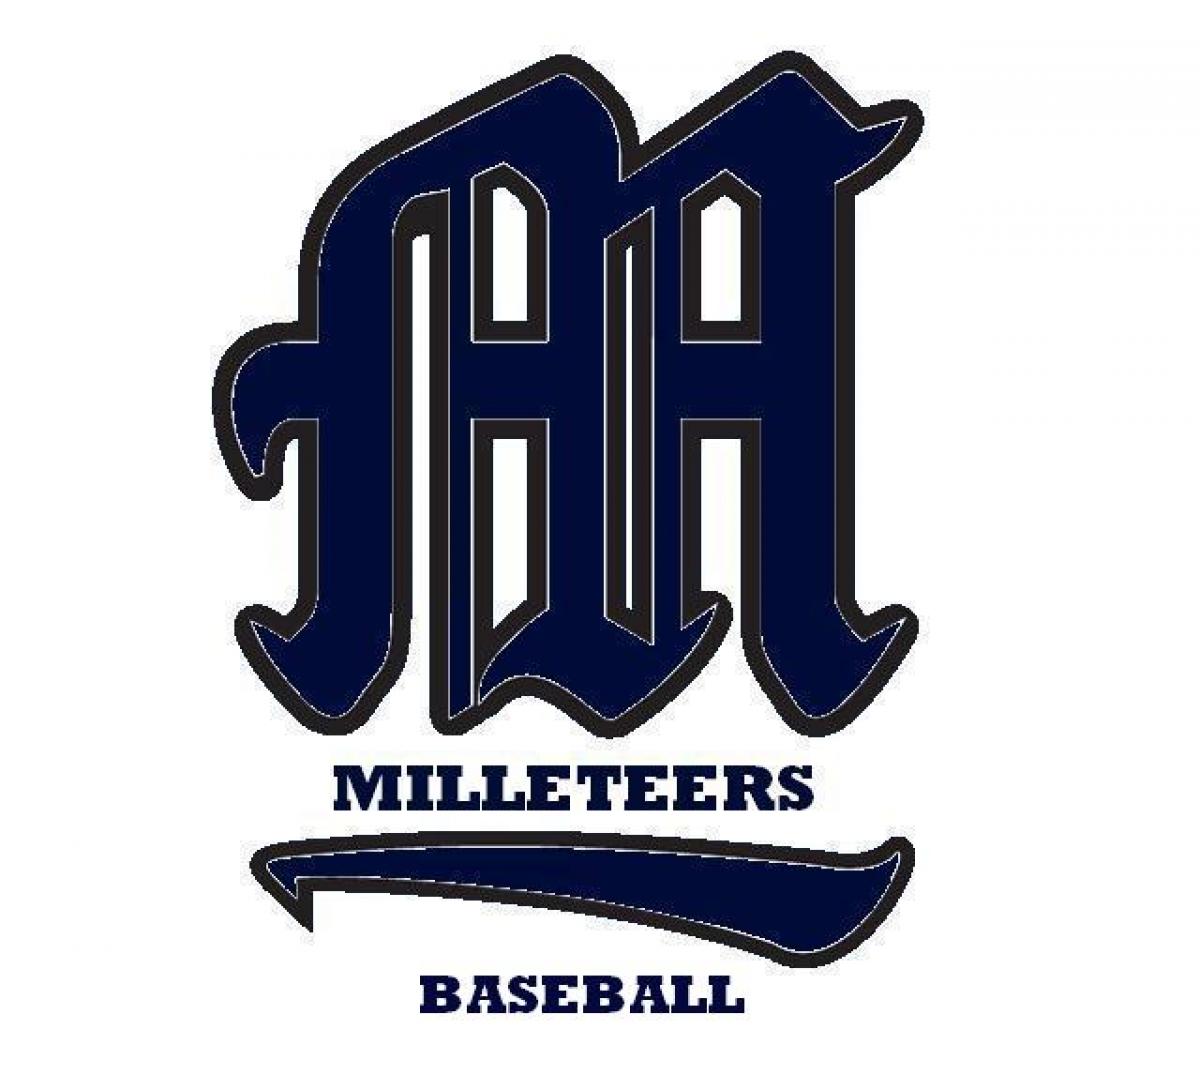 Milleteers Put A Dent In Bardo’s Playoff Hopes